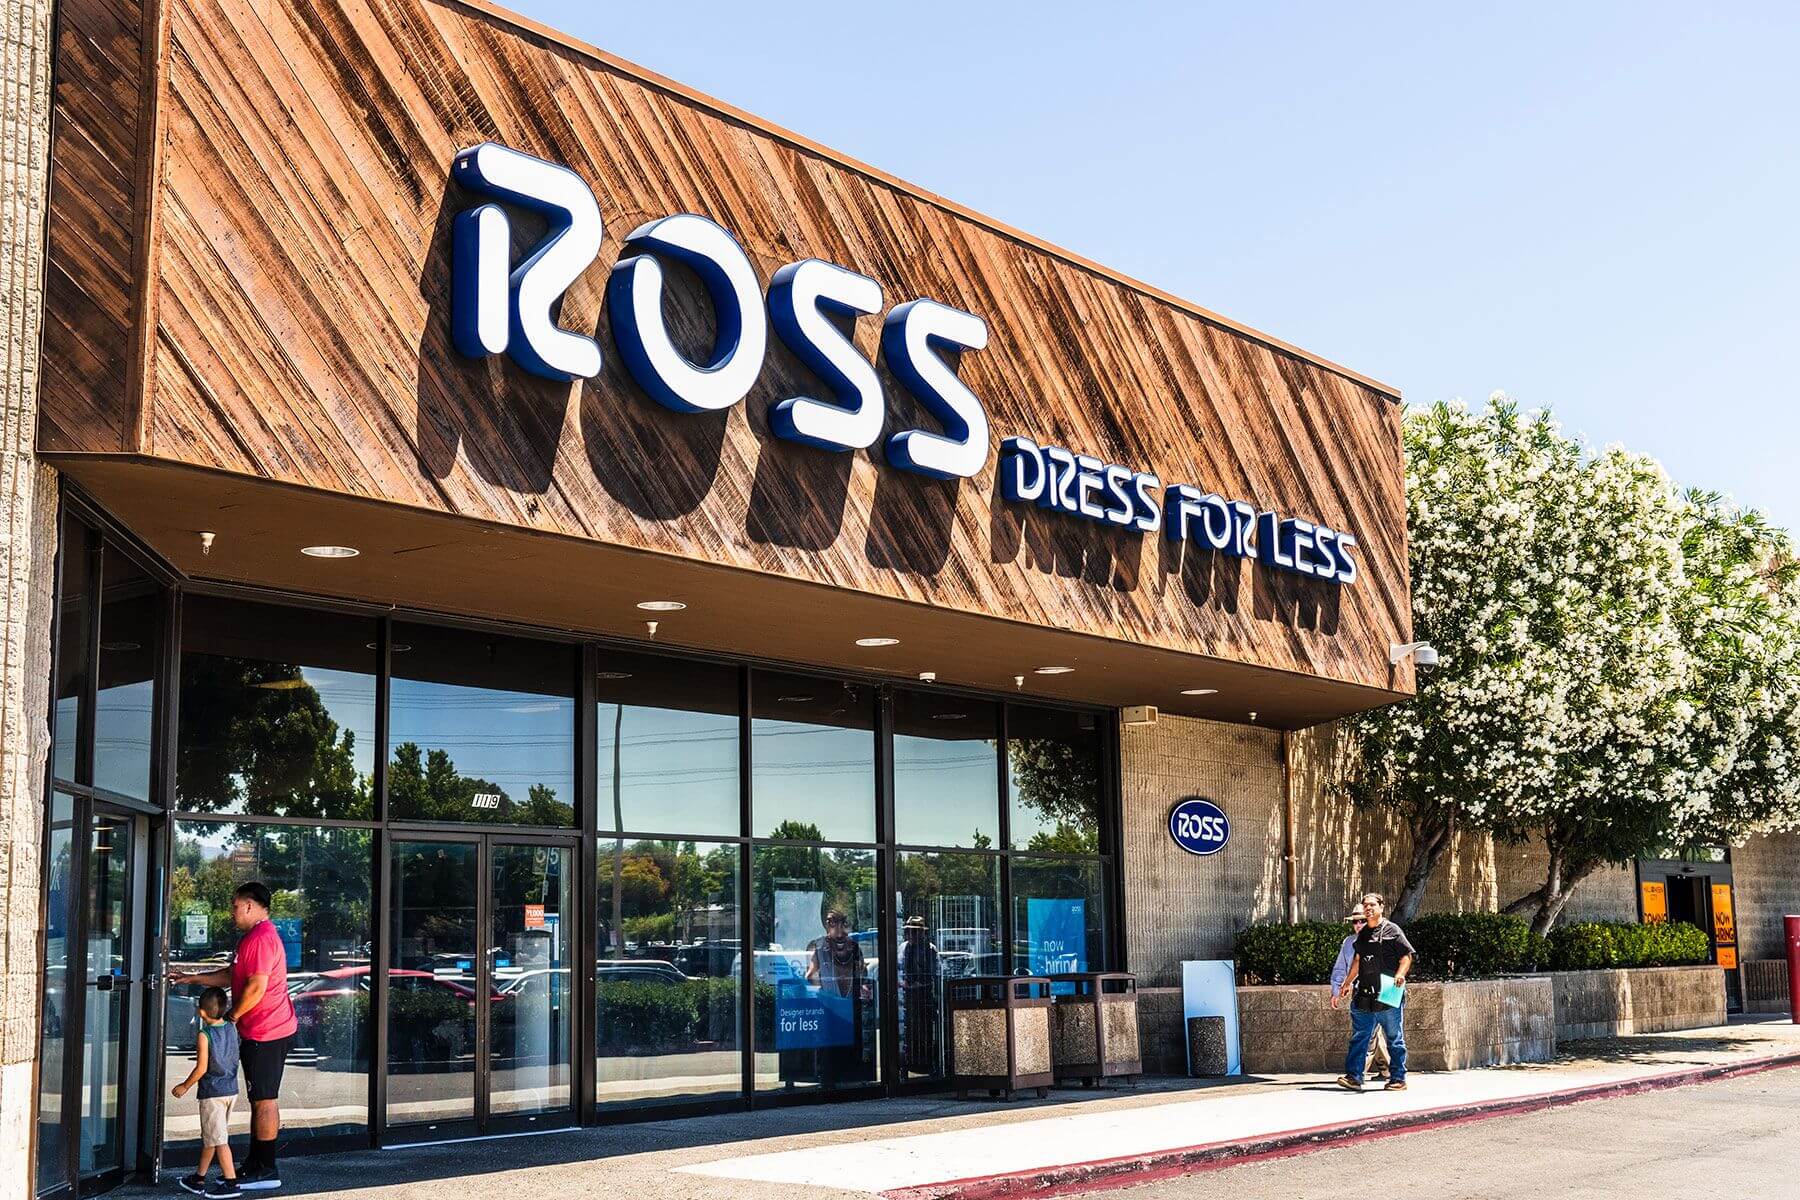 About Ross Customer Satisfaction Survey